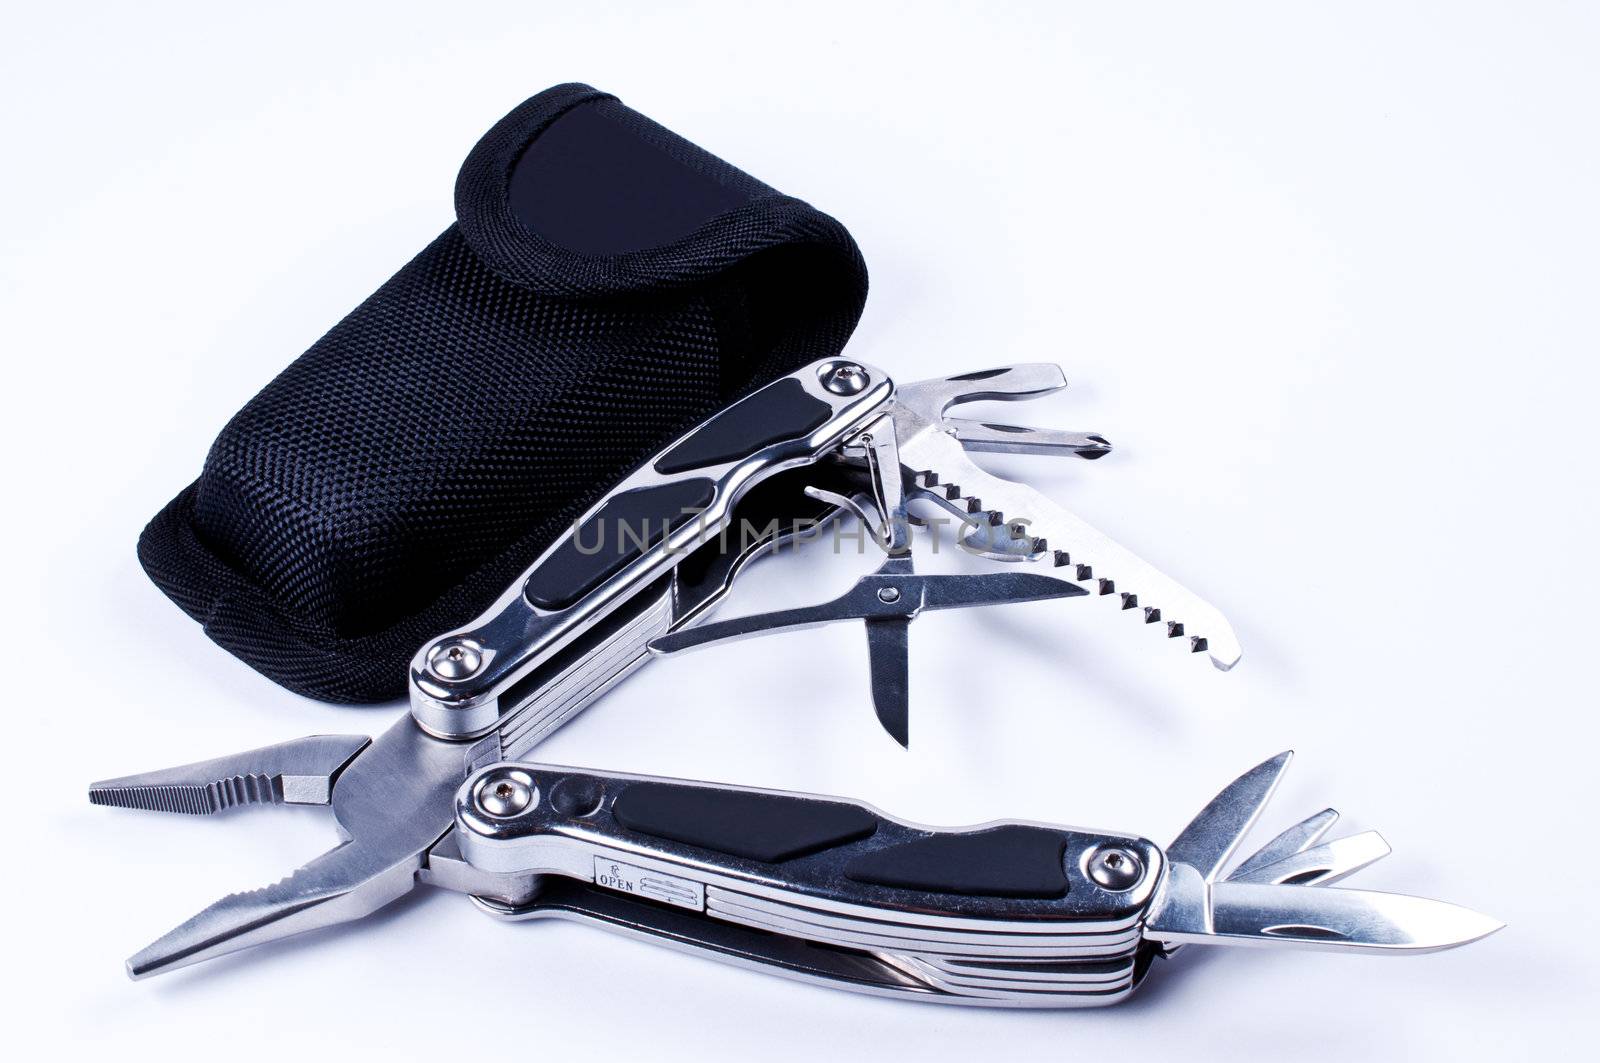 Fully unfolded multi tool with case on white background